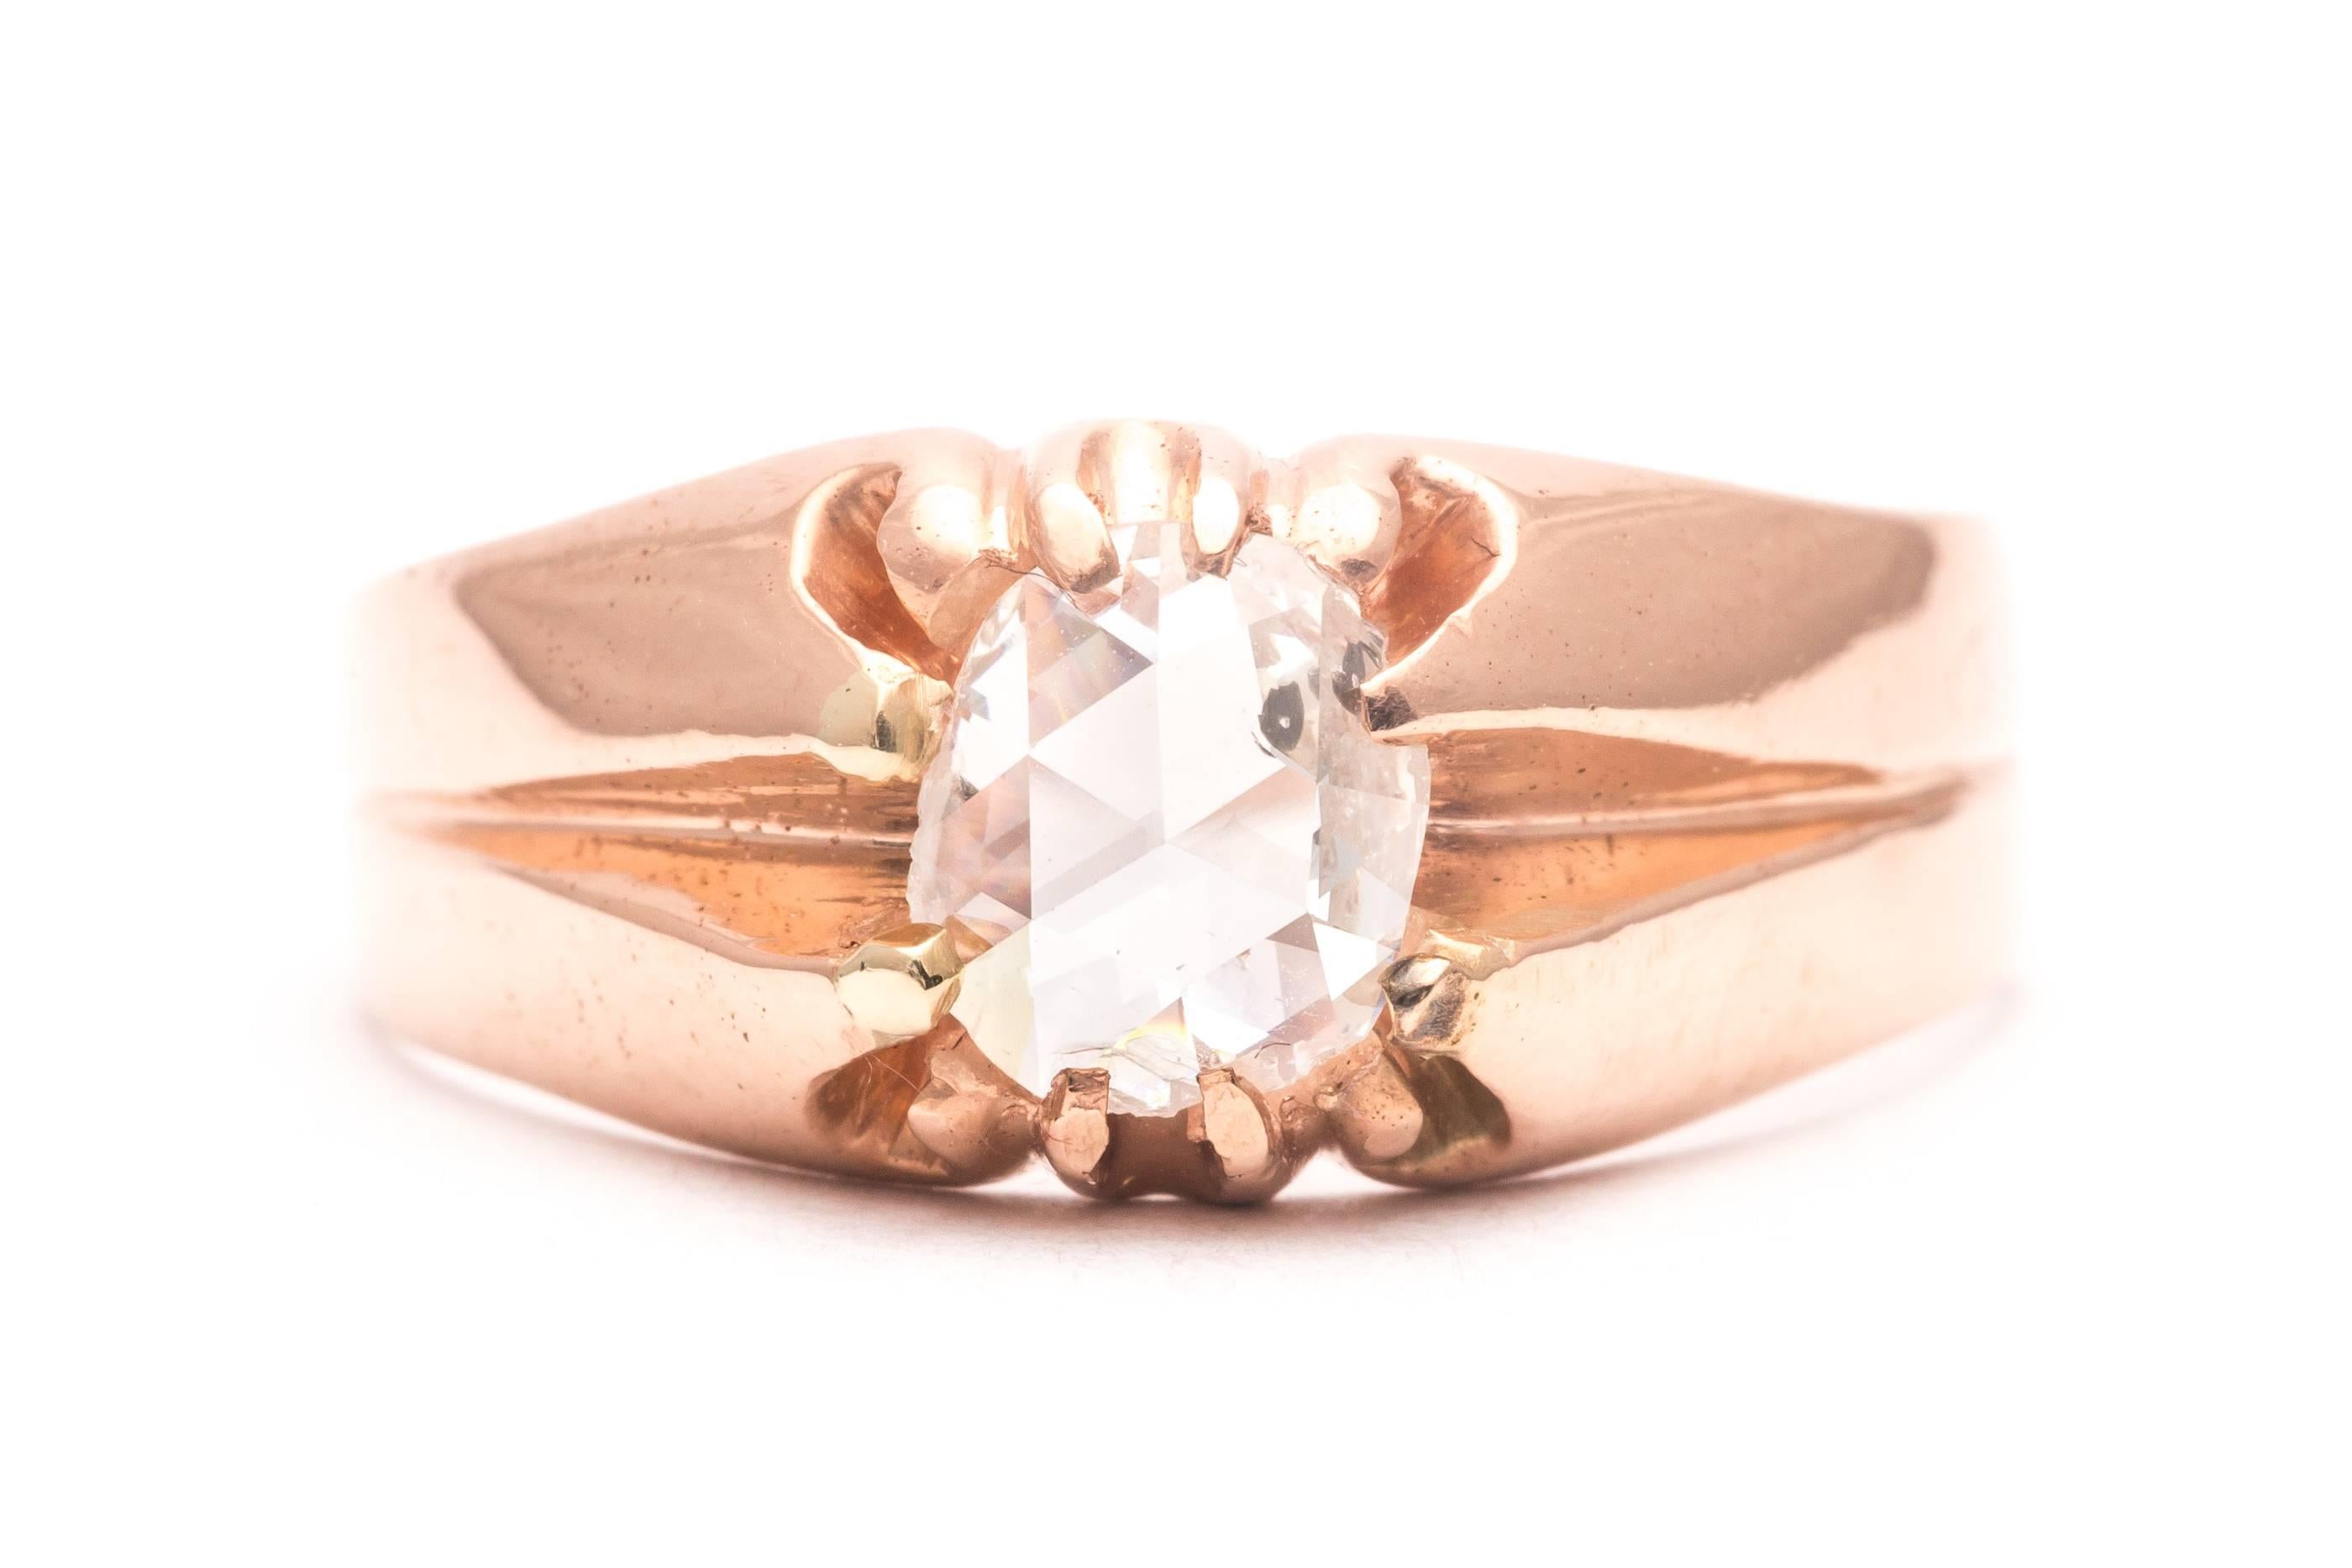 An antique victorian period rose cut diamond mens ring in 14 karat rose gold. Set with a single diamond in a beautifully style mounting, this ring is a prime example of a victorian era mens ring. Secured by beautifully stylized rose gold claw